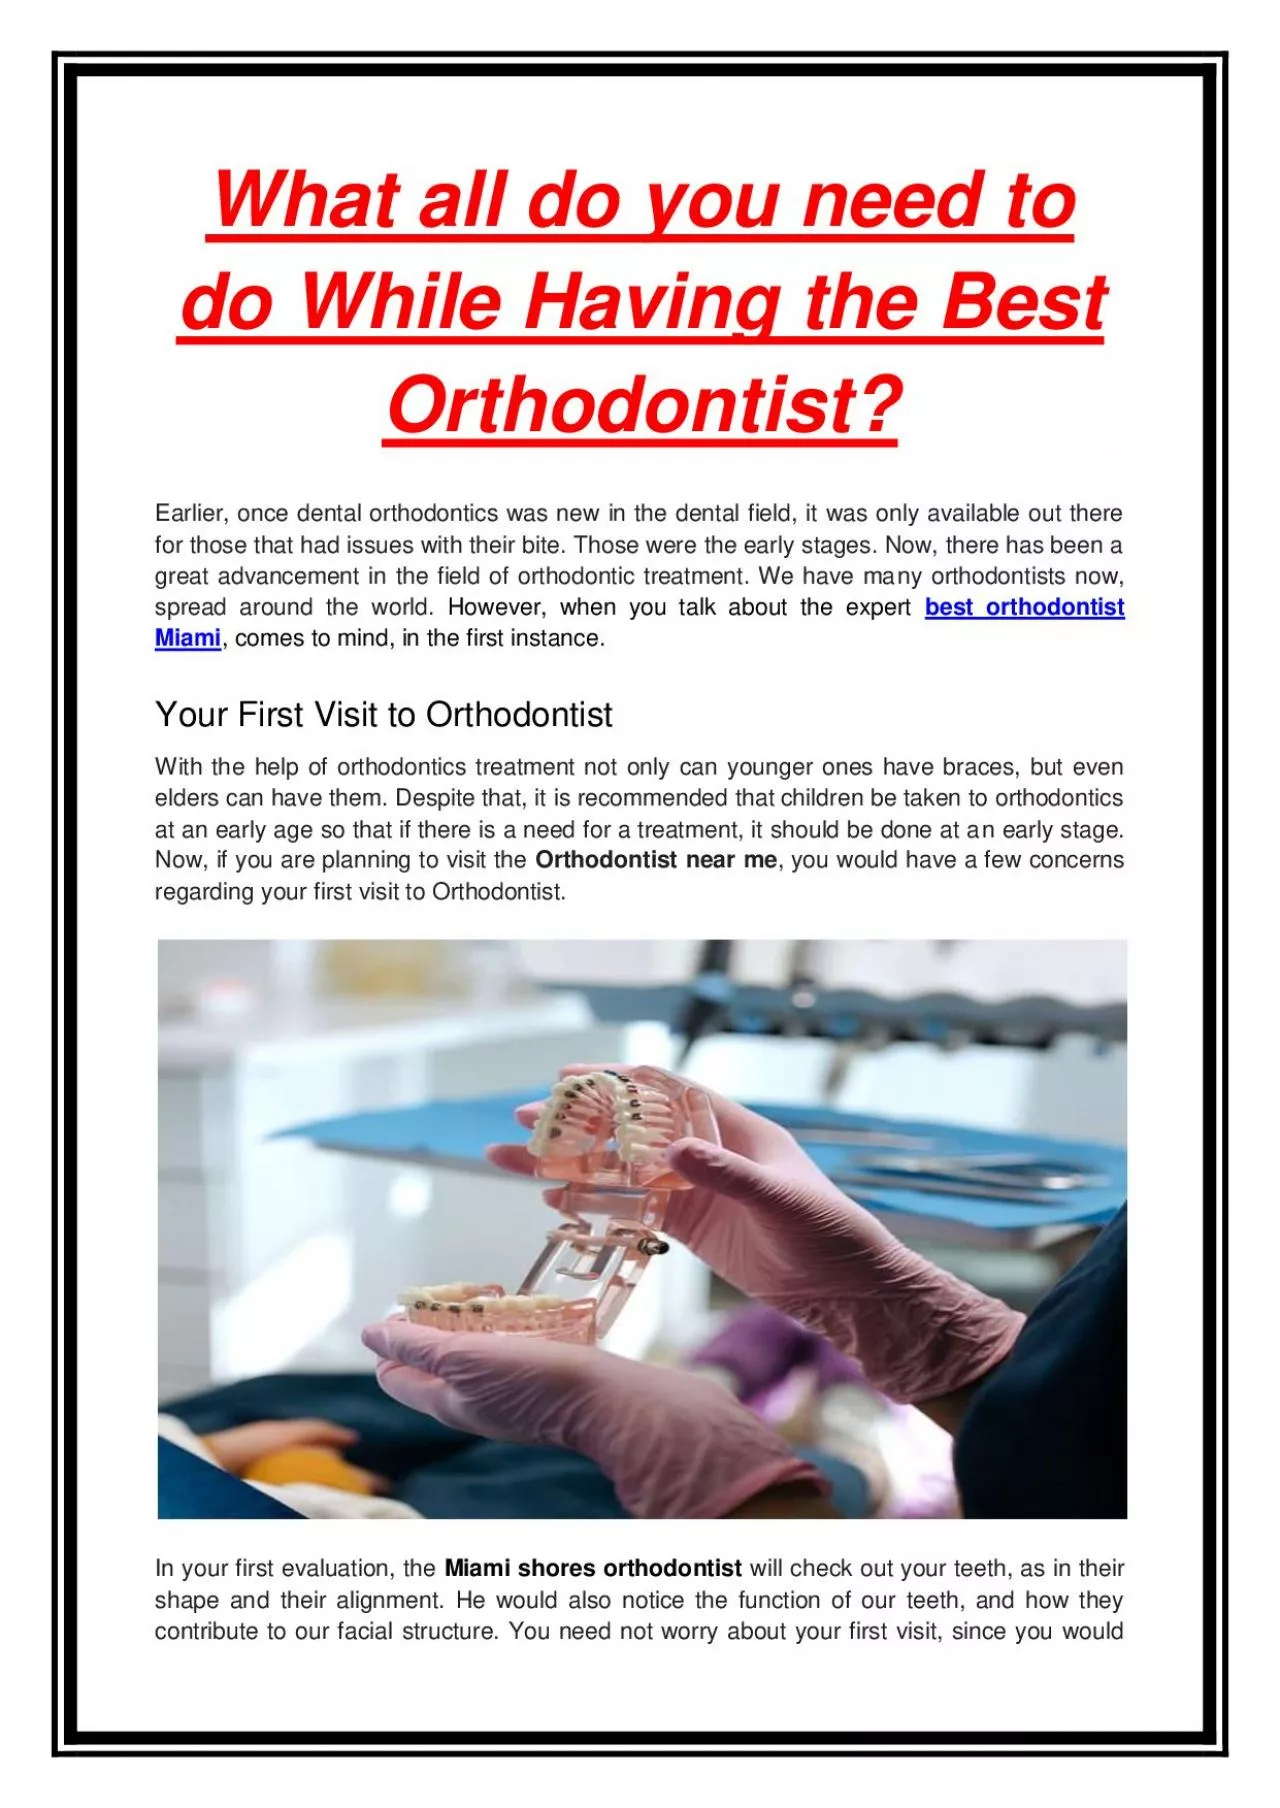 What all do you need to do While Having the Best Orthodontist?